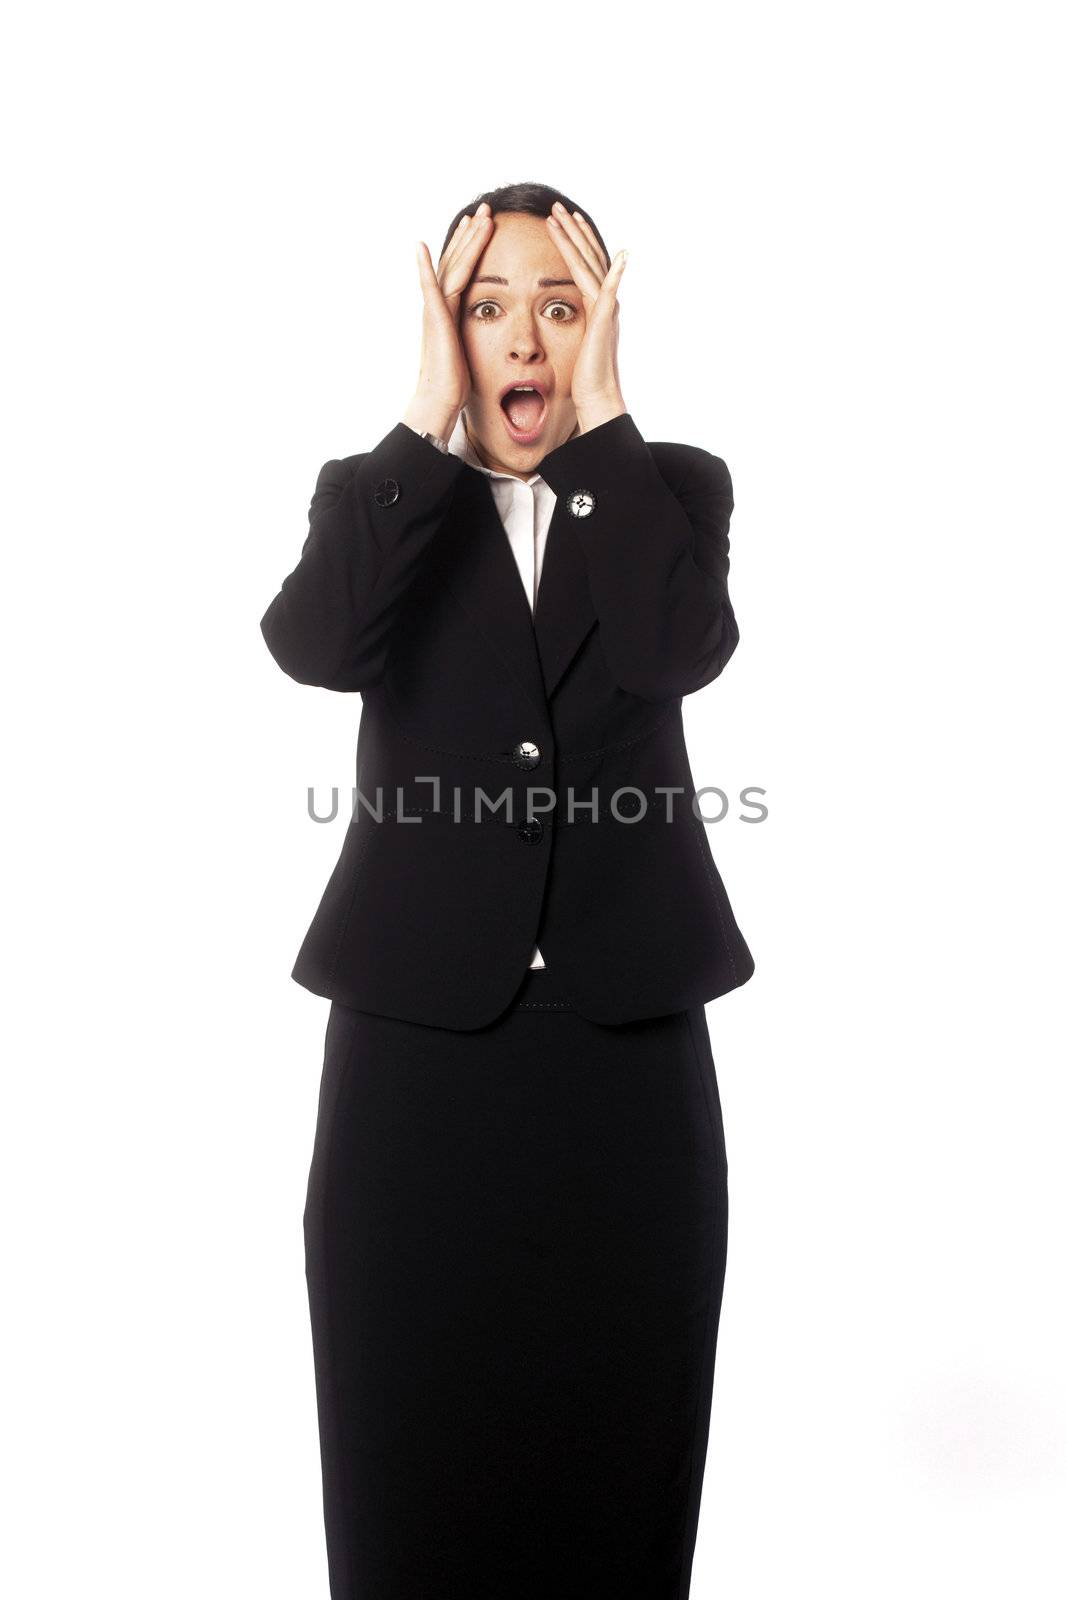 A surprised business woman